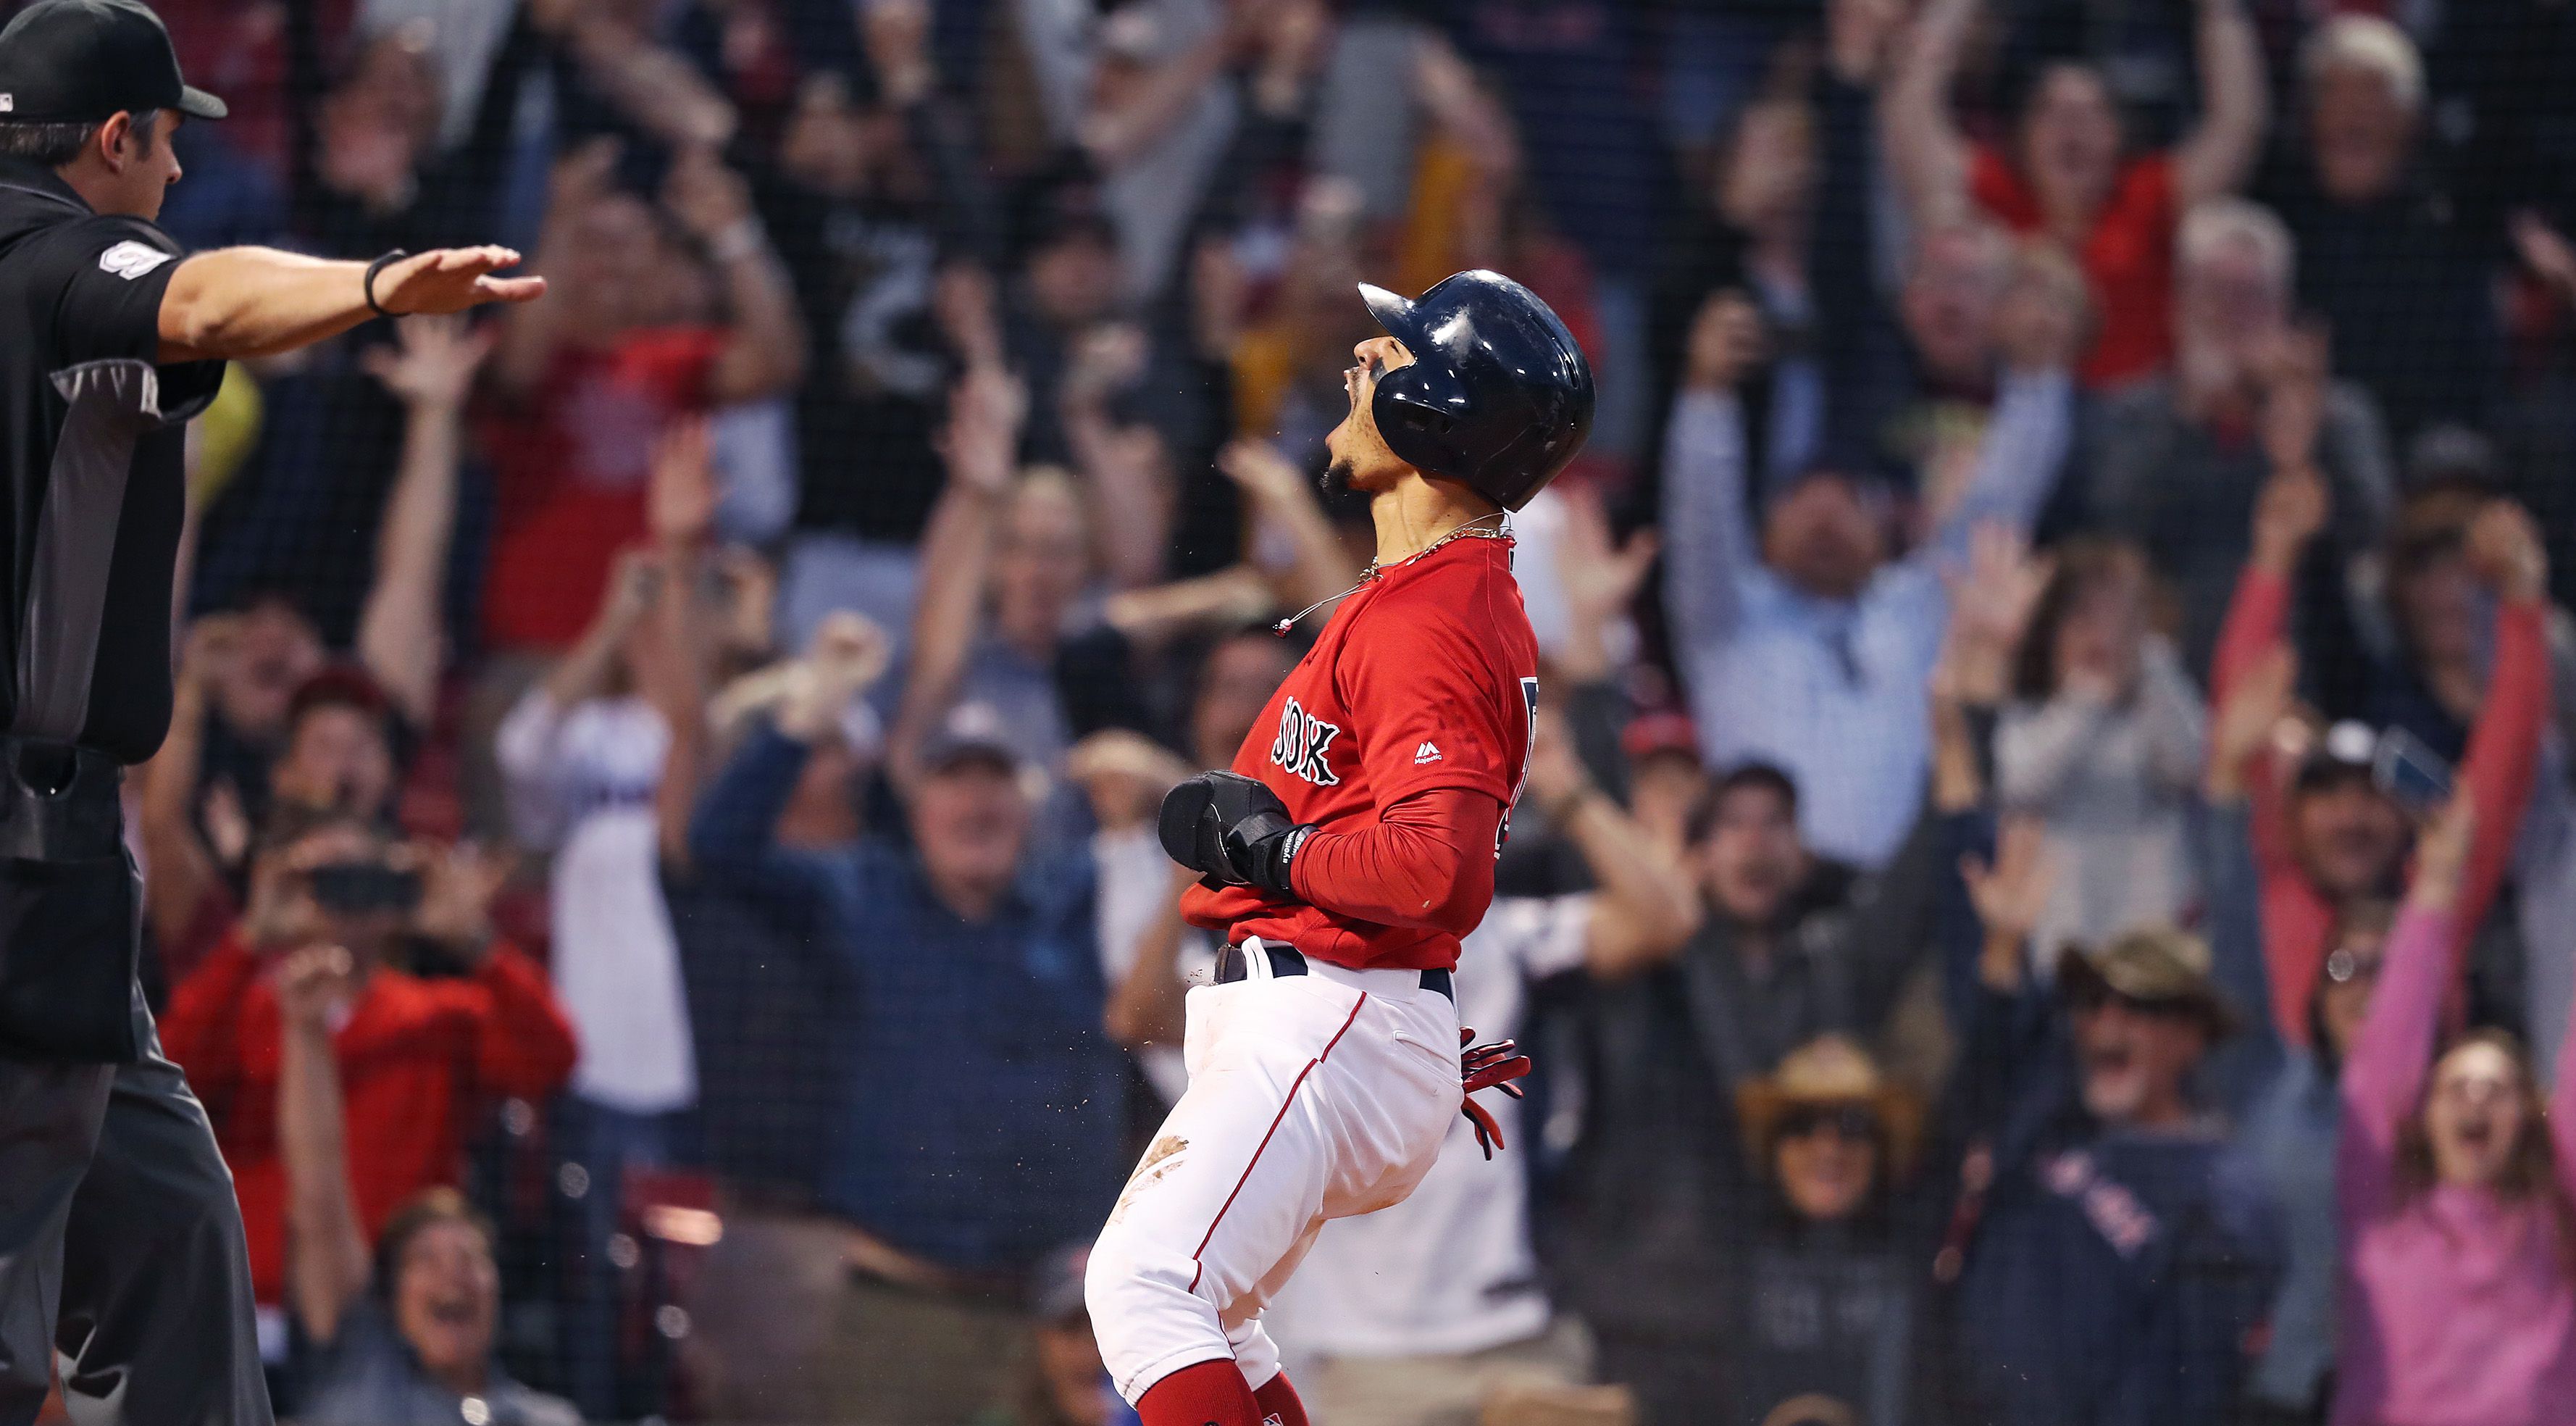 Mookie Betts puts on a show early for Red Sox - The Boston Globe